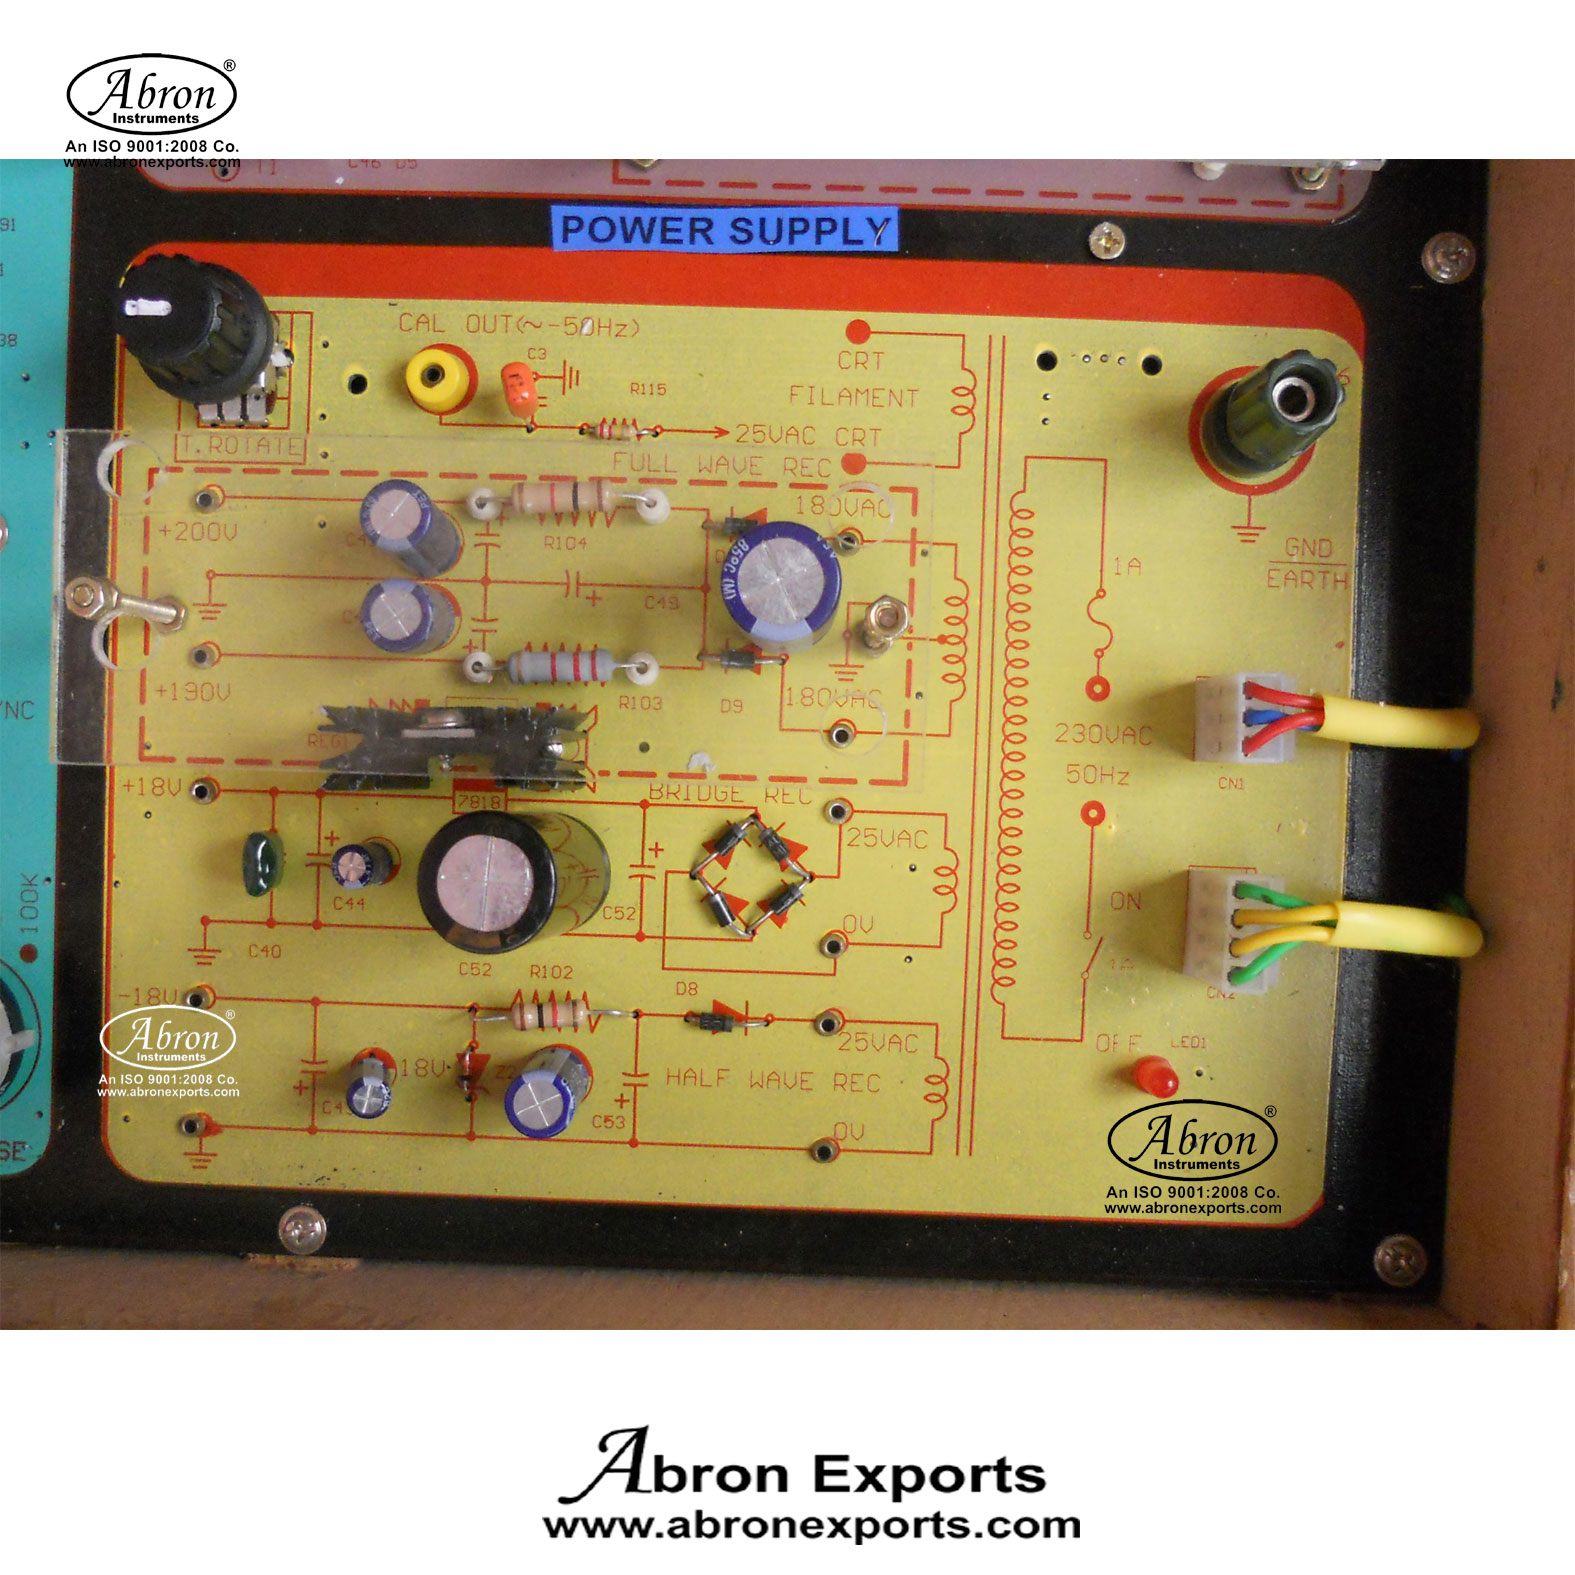 Cro demonstration trainer kit to study abron part AE-1426K